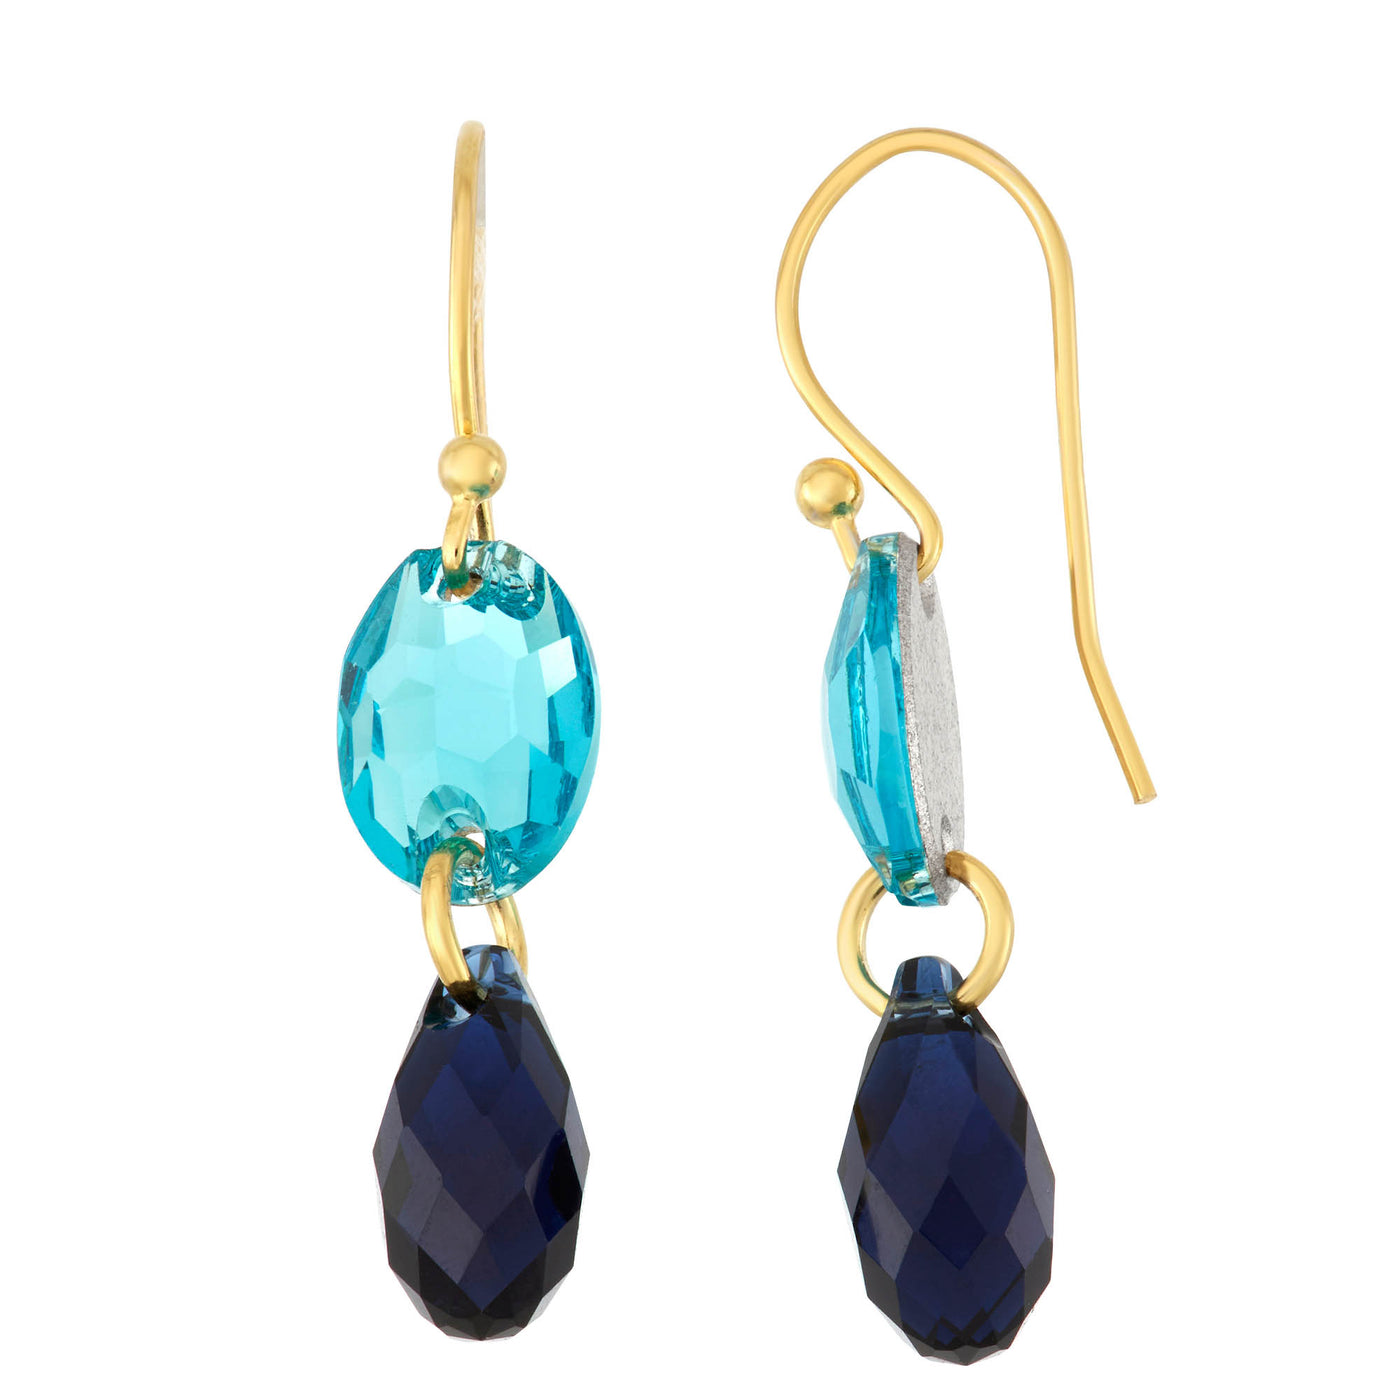 Rebecca Sloane Gold Oval Tear Drop Earring With Indigo Crystals